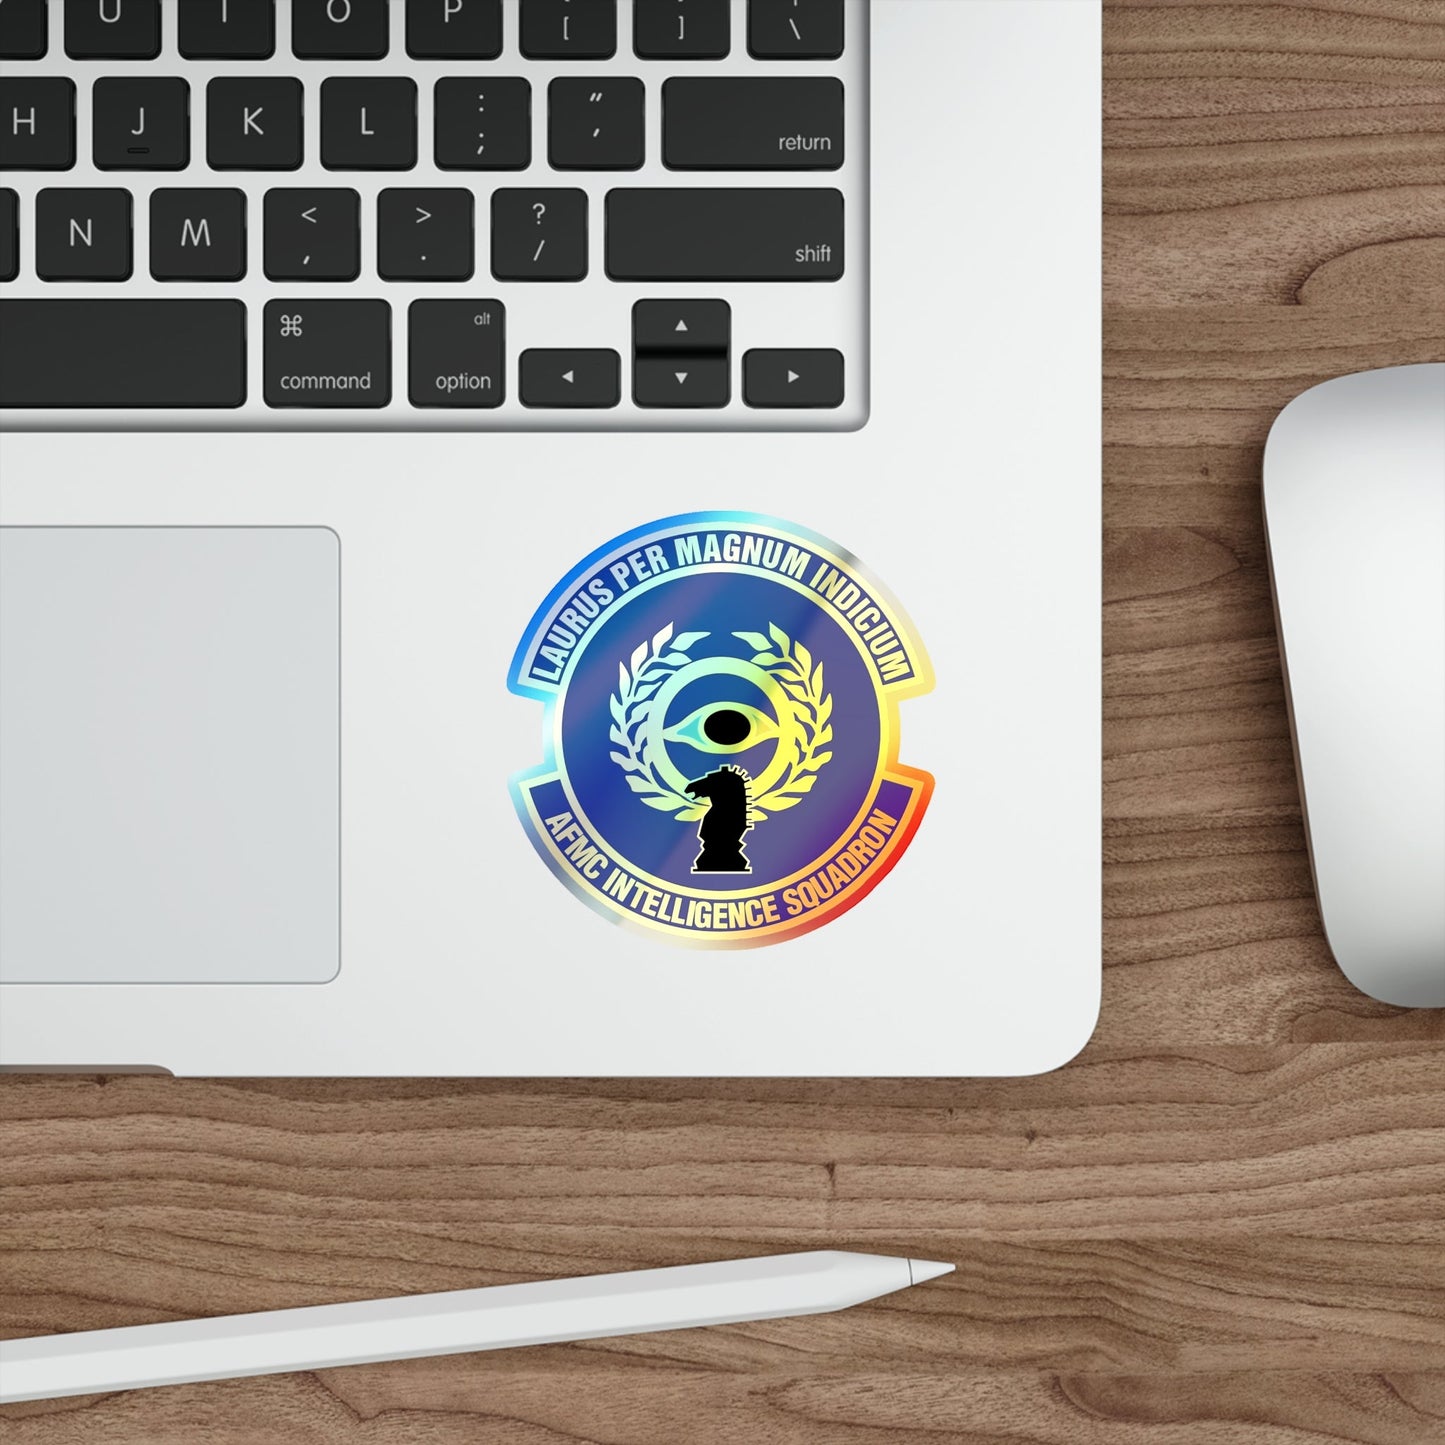 Air Force Materiel Command Intelligence Squadron (U.S. Air Force) Holographic STICKER Die-Cut Vinyl Decal-The Sticker Space